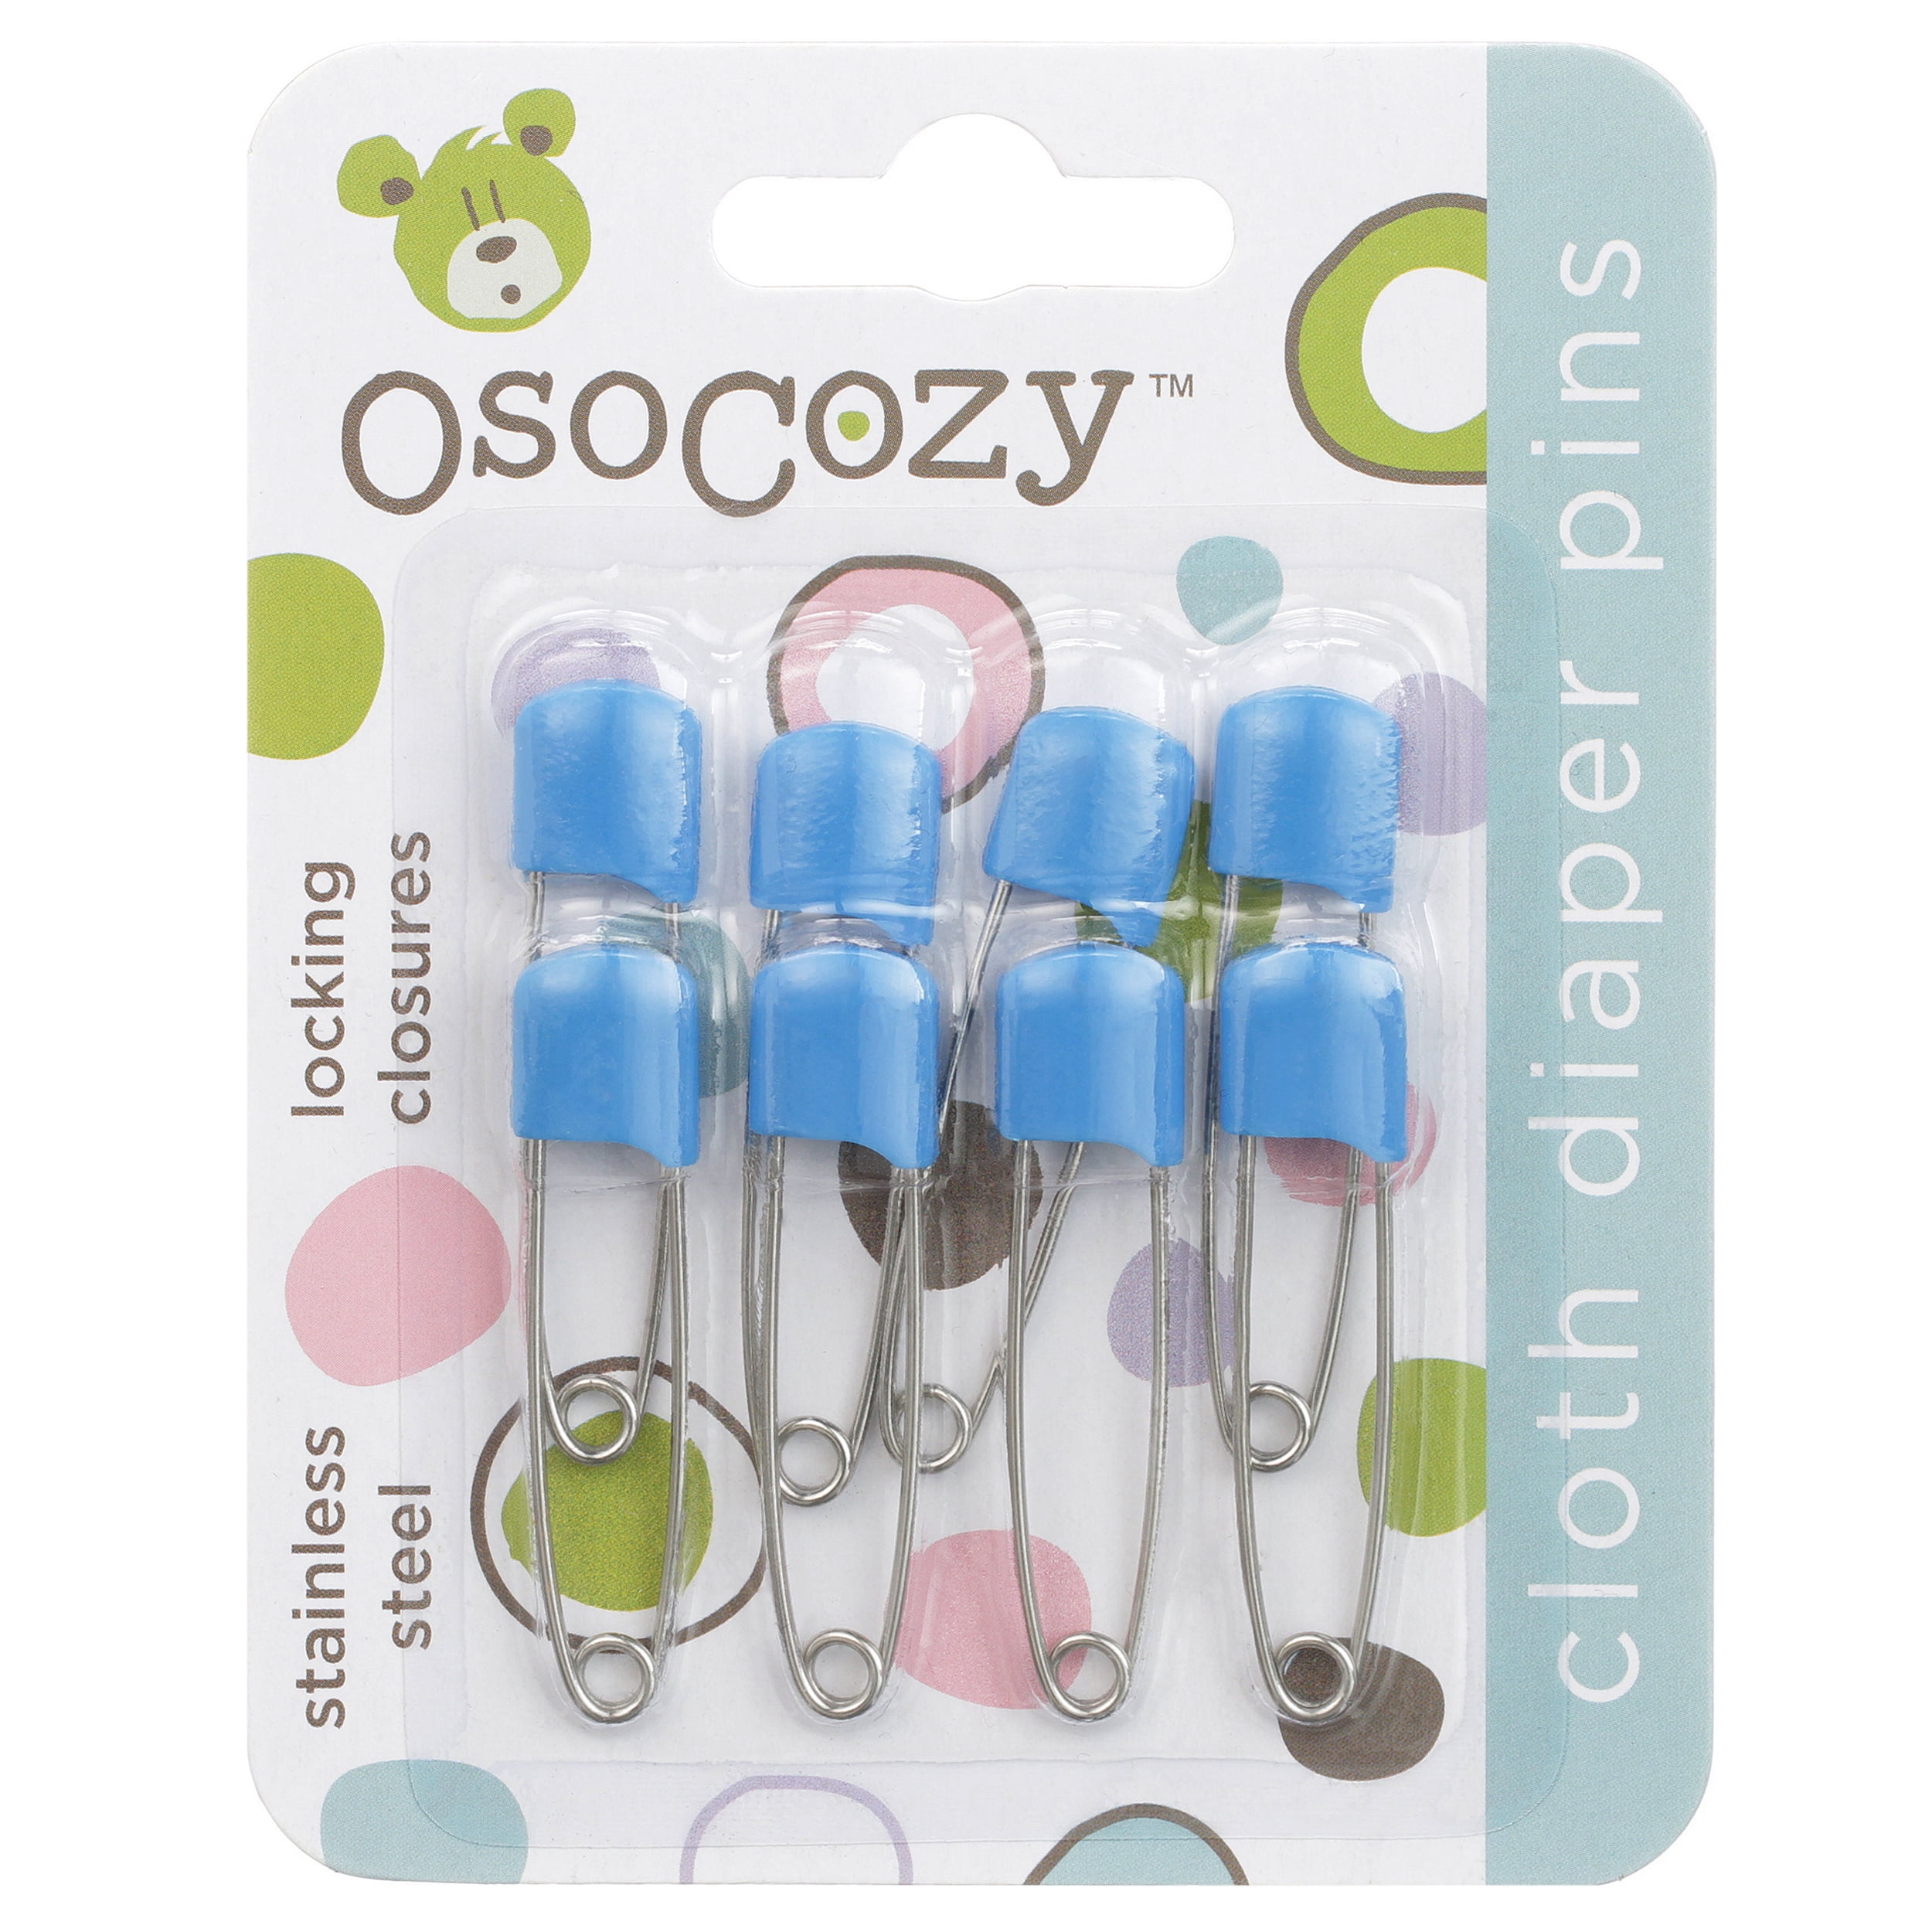 OsoCozy Diaper Pins - (Black) - Sturdy, Stainless Steel Diaper Pins with  Safe Locking Closures - Use for Special Events, Crafts or Colorful Laundry